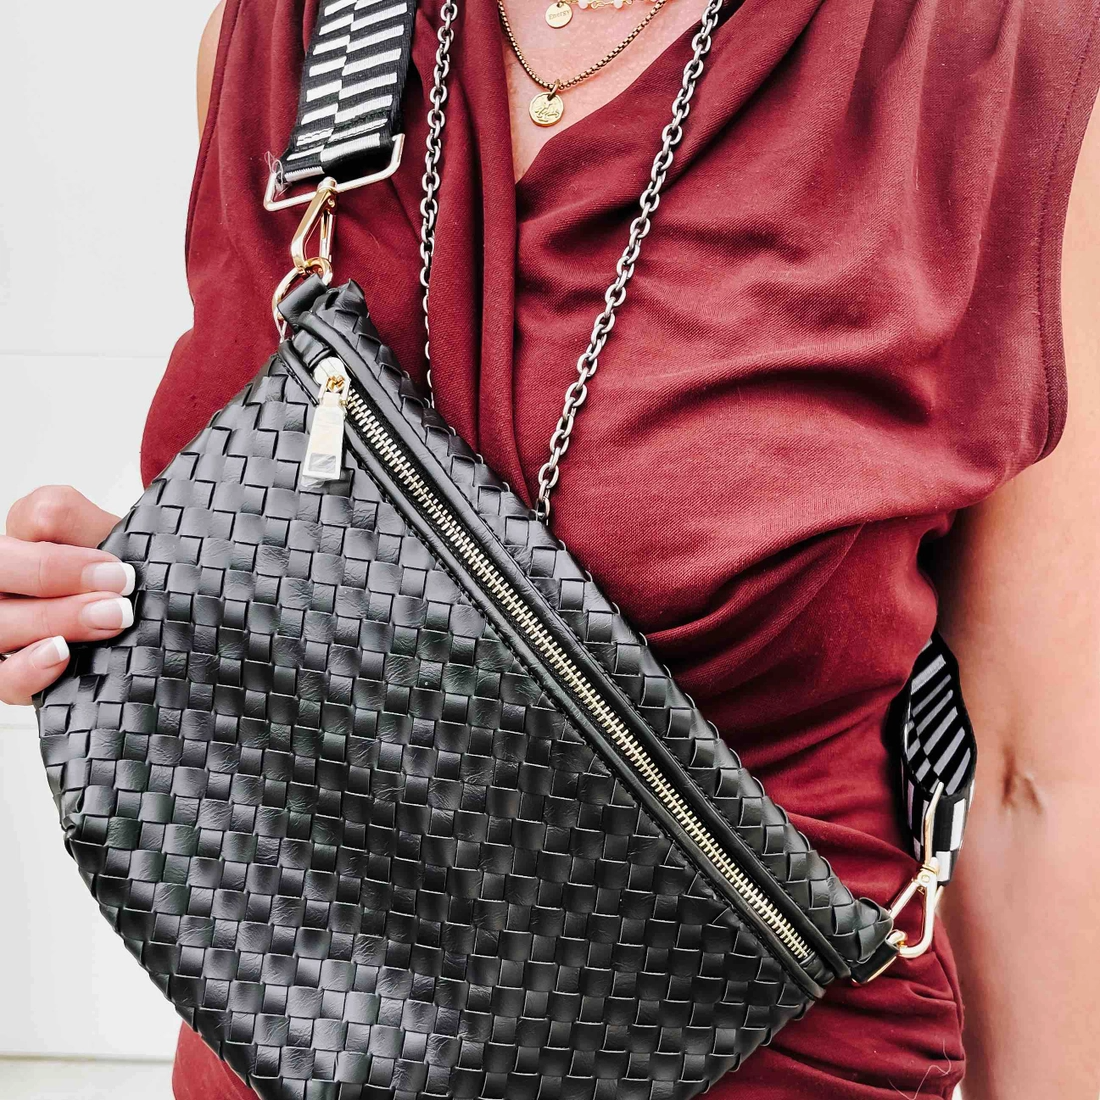 Pretty Simple Woven Westlyn Bum Bag in Brown - Her Hide Out